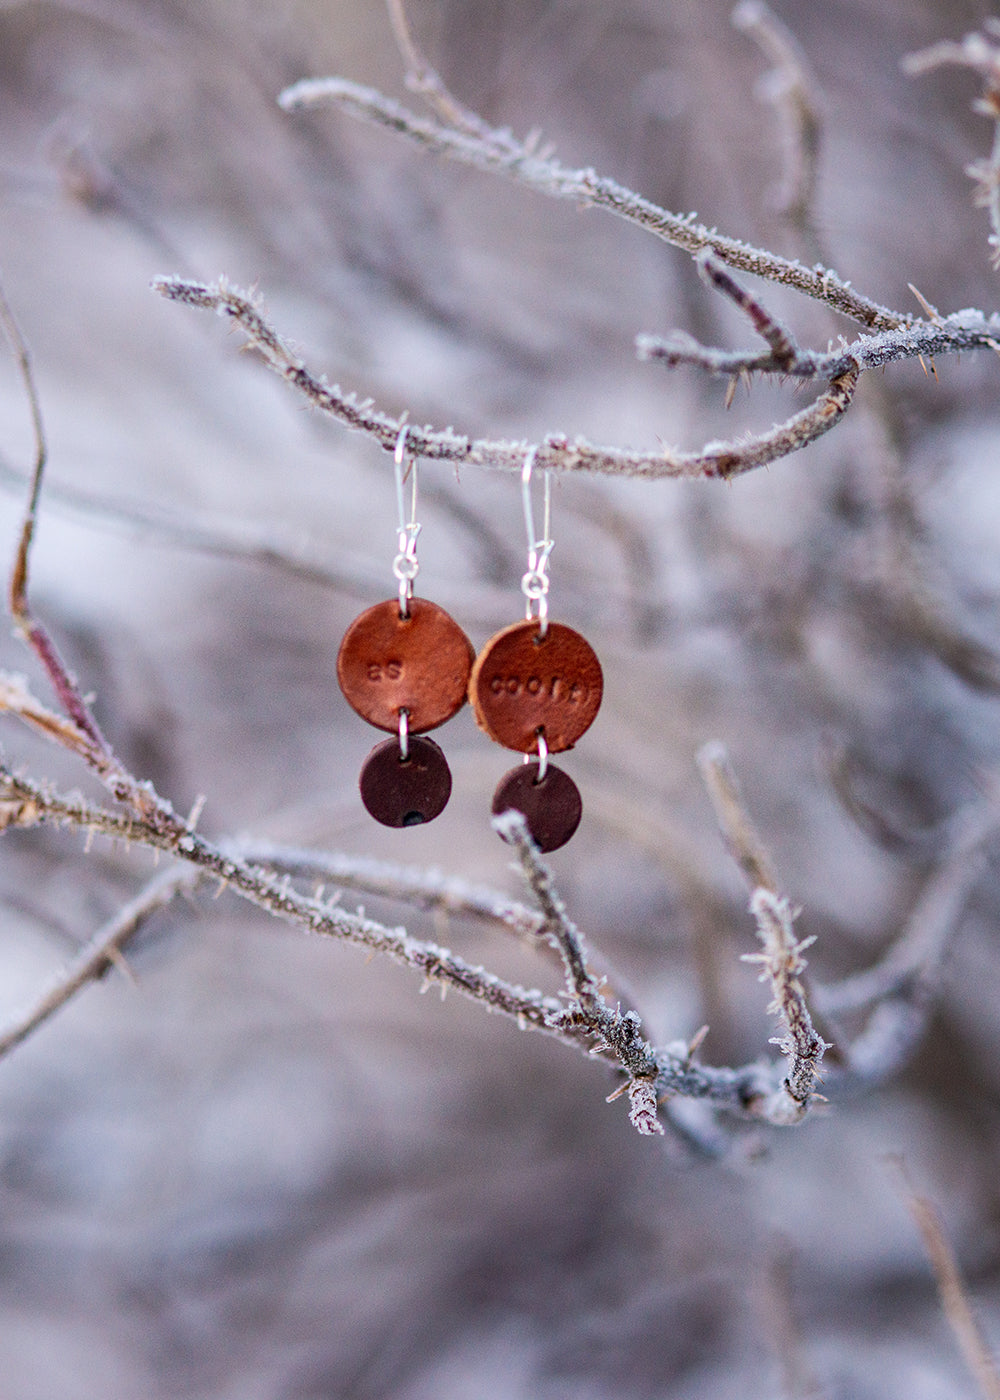 Light weight leather earrings "as coolt"